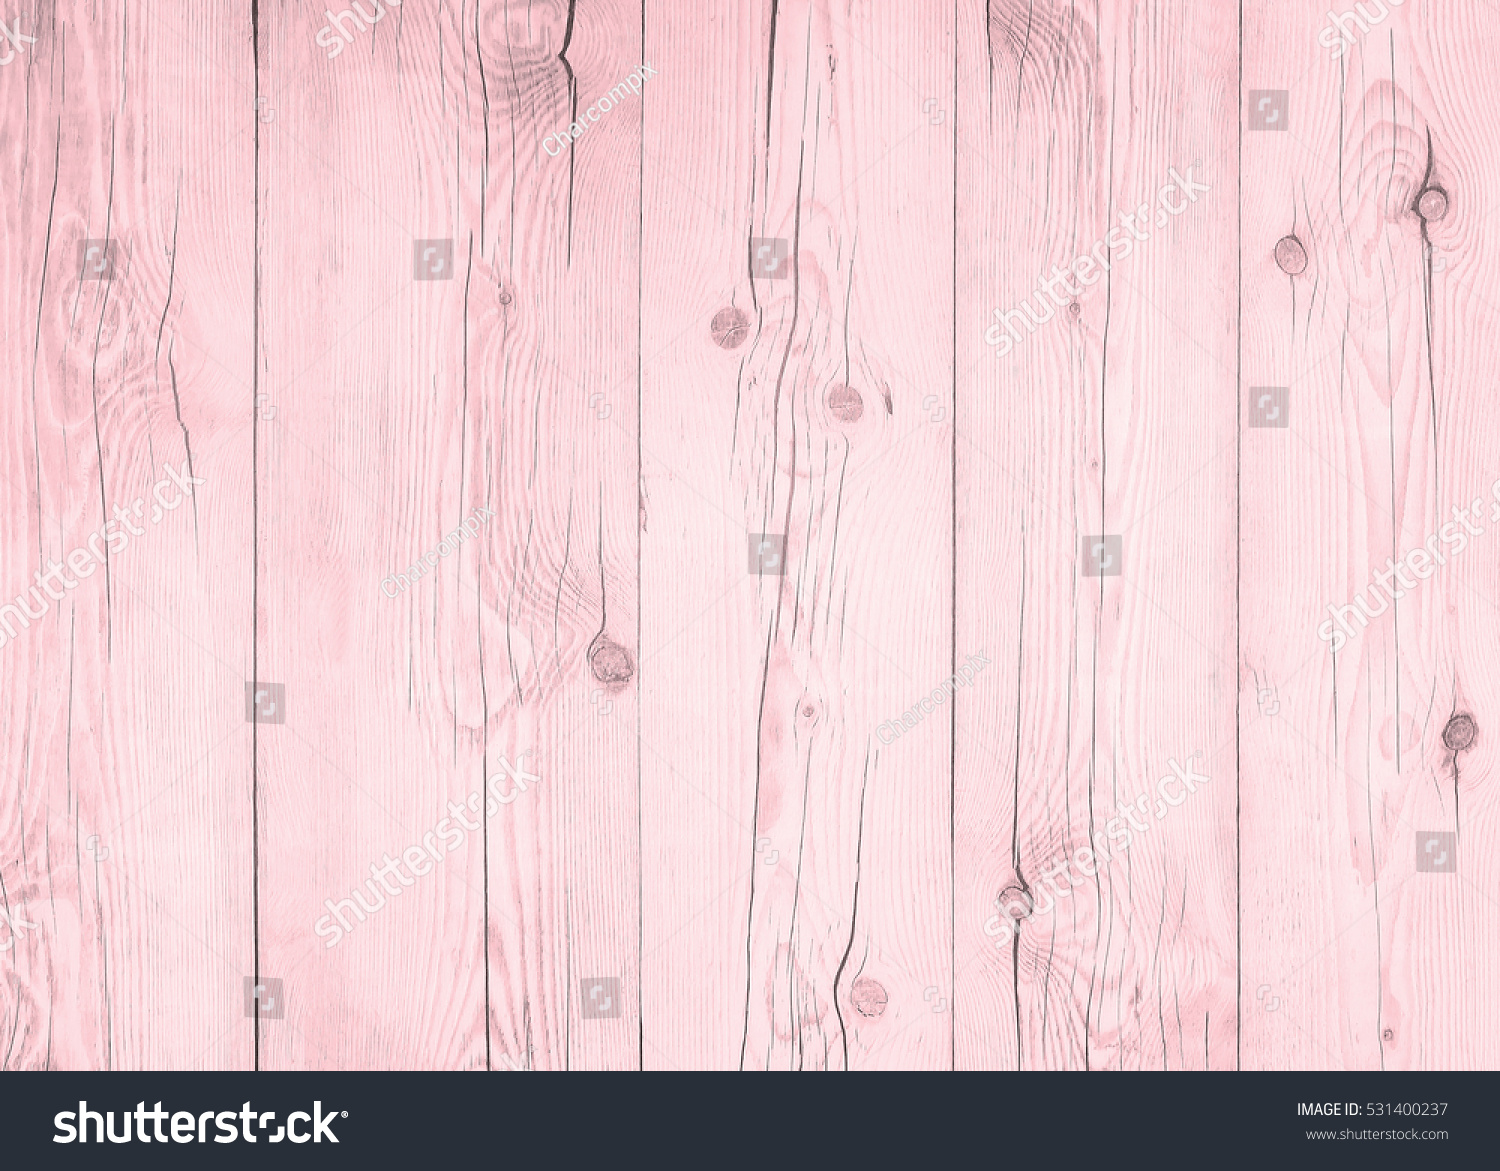 Wood floor texture pattern plank surface painted white and pink pastel wall background #531400237